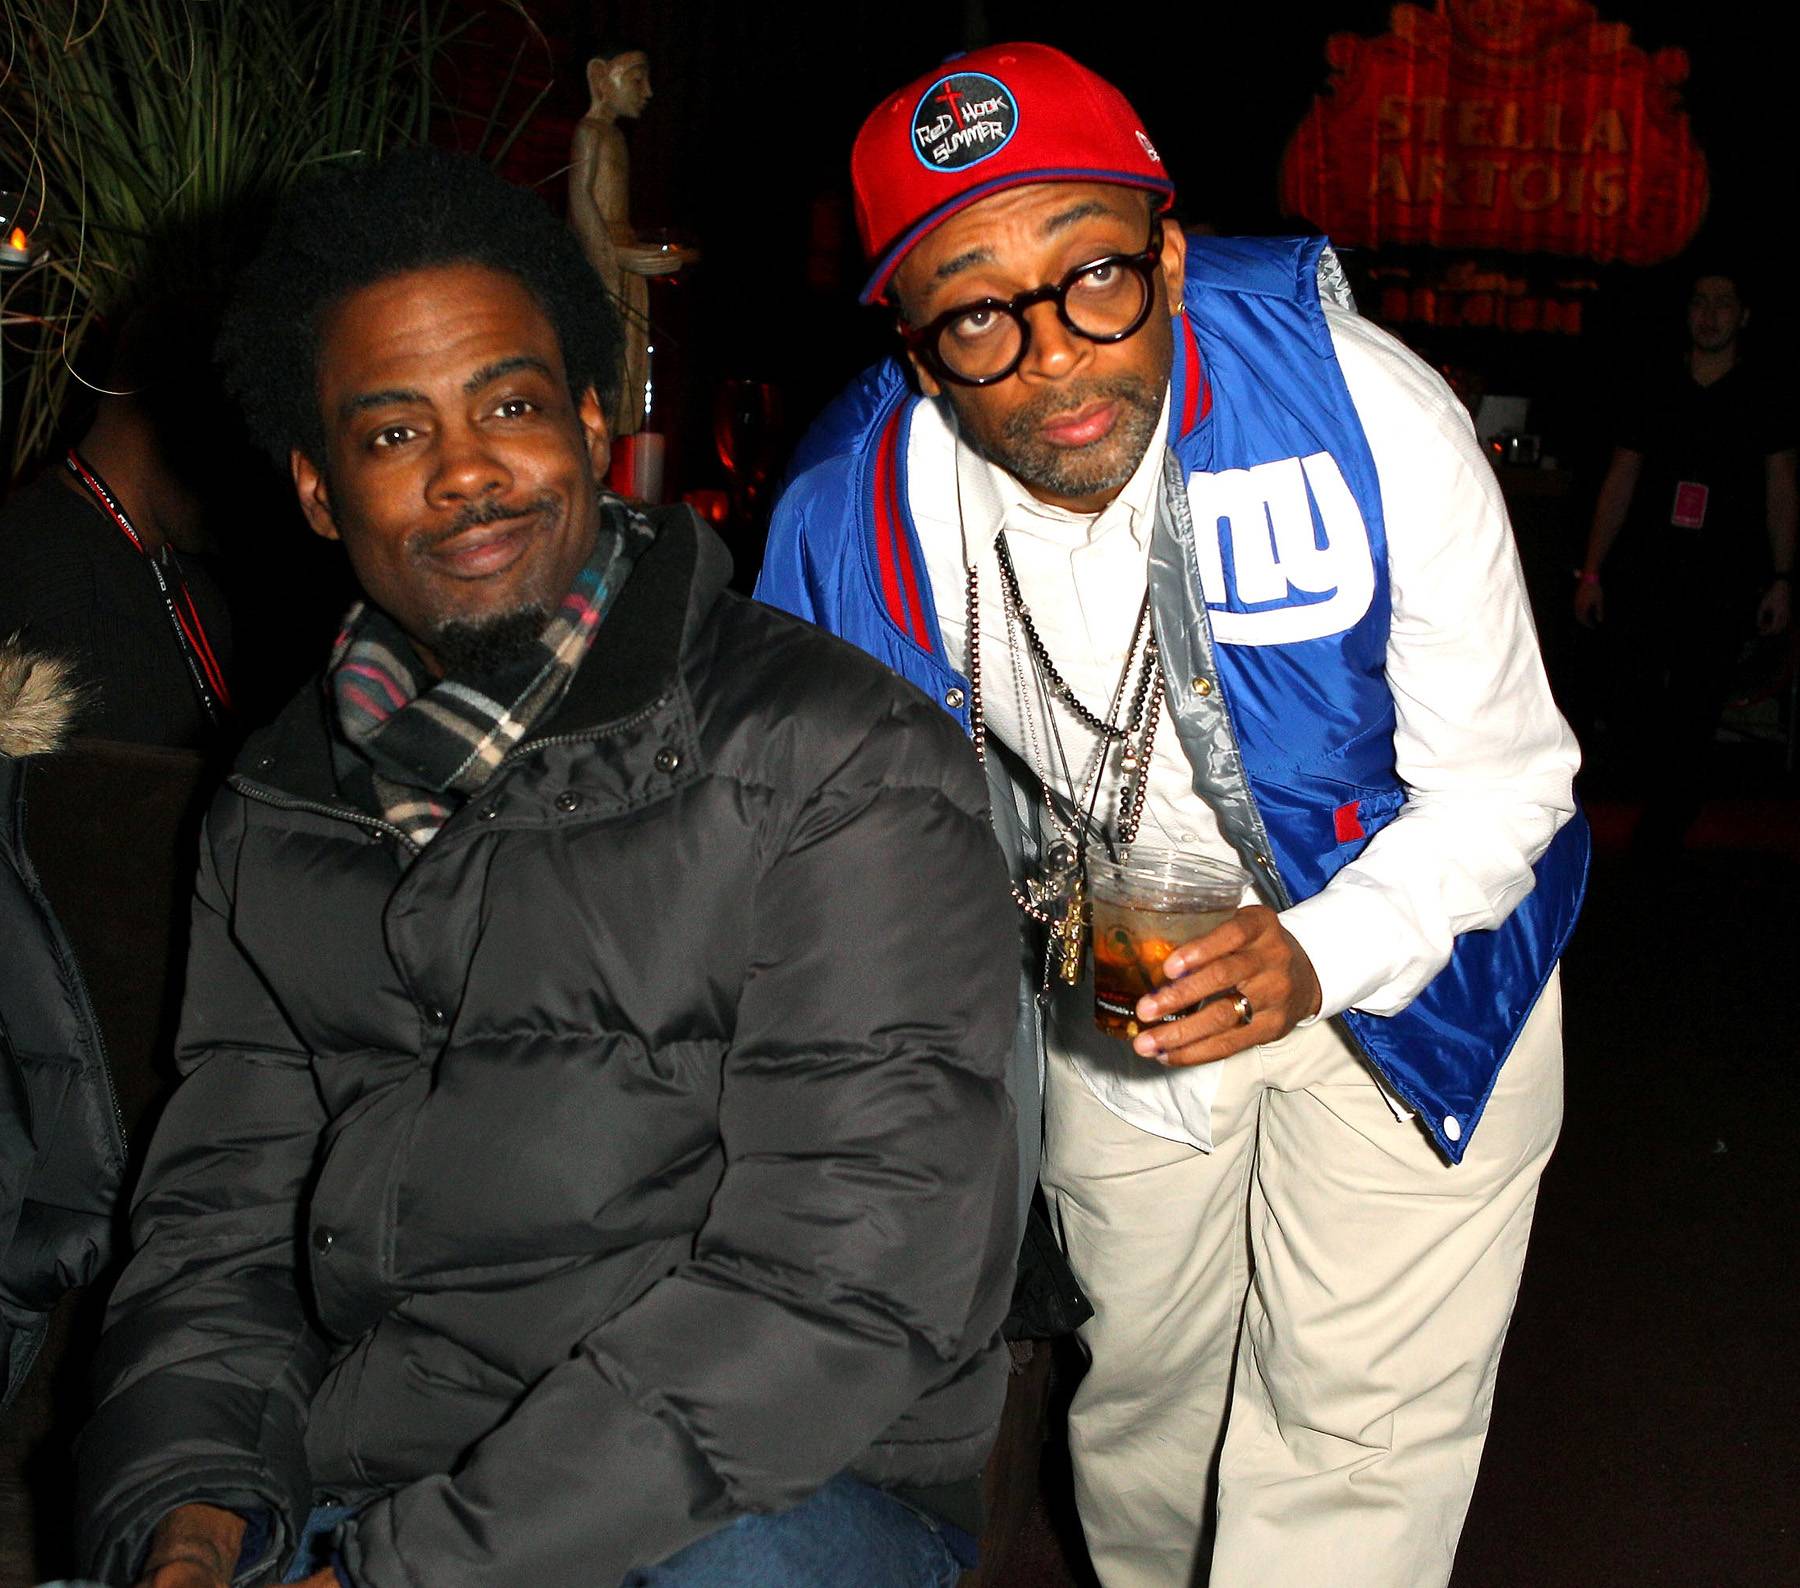 Brooklyn's in the House\r - Brooklyn natives Chris Rock and Spike Lee attend the T-Mobile Presents Google Music at TAO, a nightlife event at the 2012 Sundance Film Festival in Park City, Utah. Rock is in town to promote his new film, 2 Days in New York, with Julie Delpy, while Lee is there to screen his upcoming feature, Red Hook Summer.&nbsp; (Photo: Joe Scarnici/Getty Images)